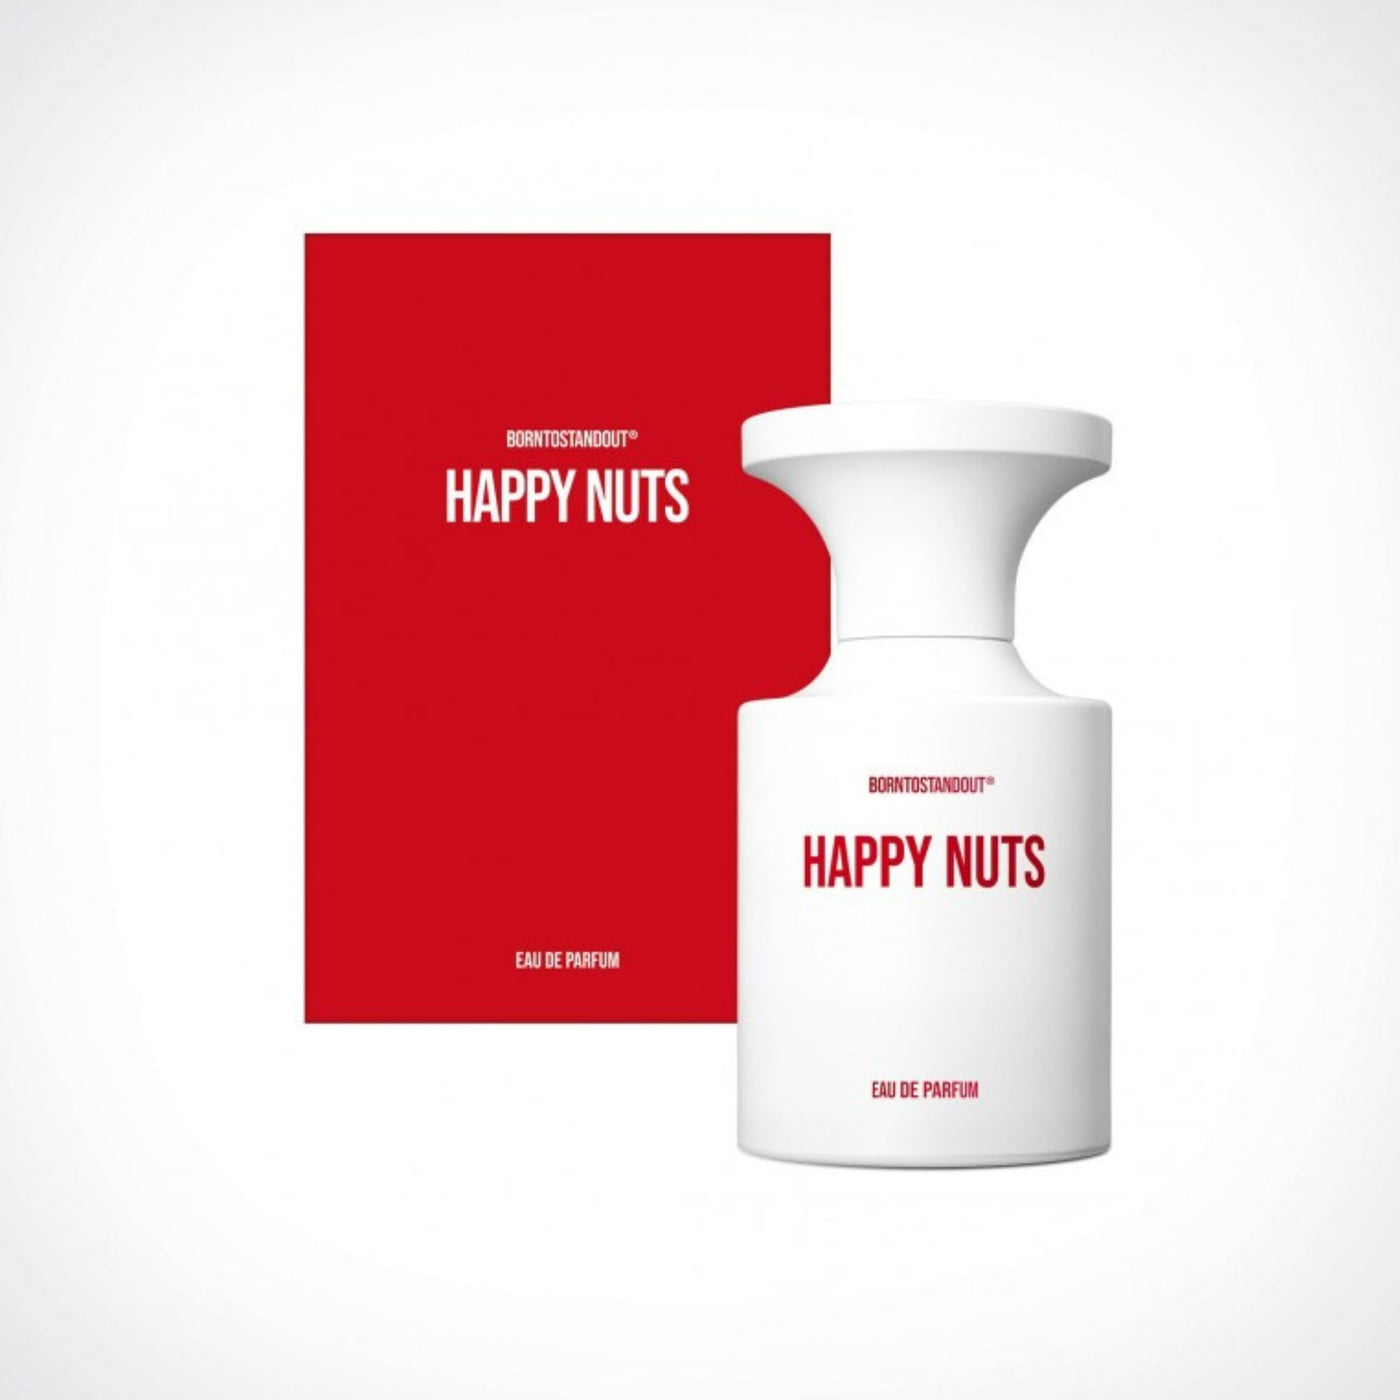 Happy Nuts Born to stand out Perfume